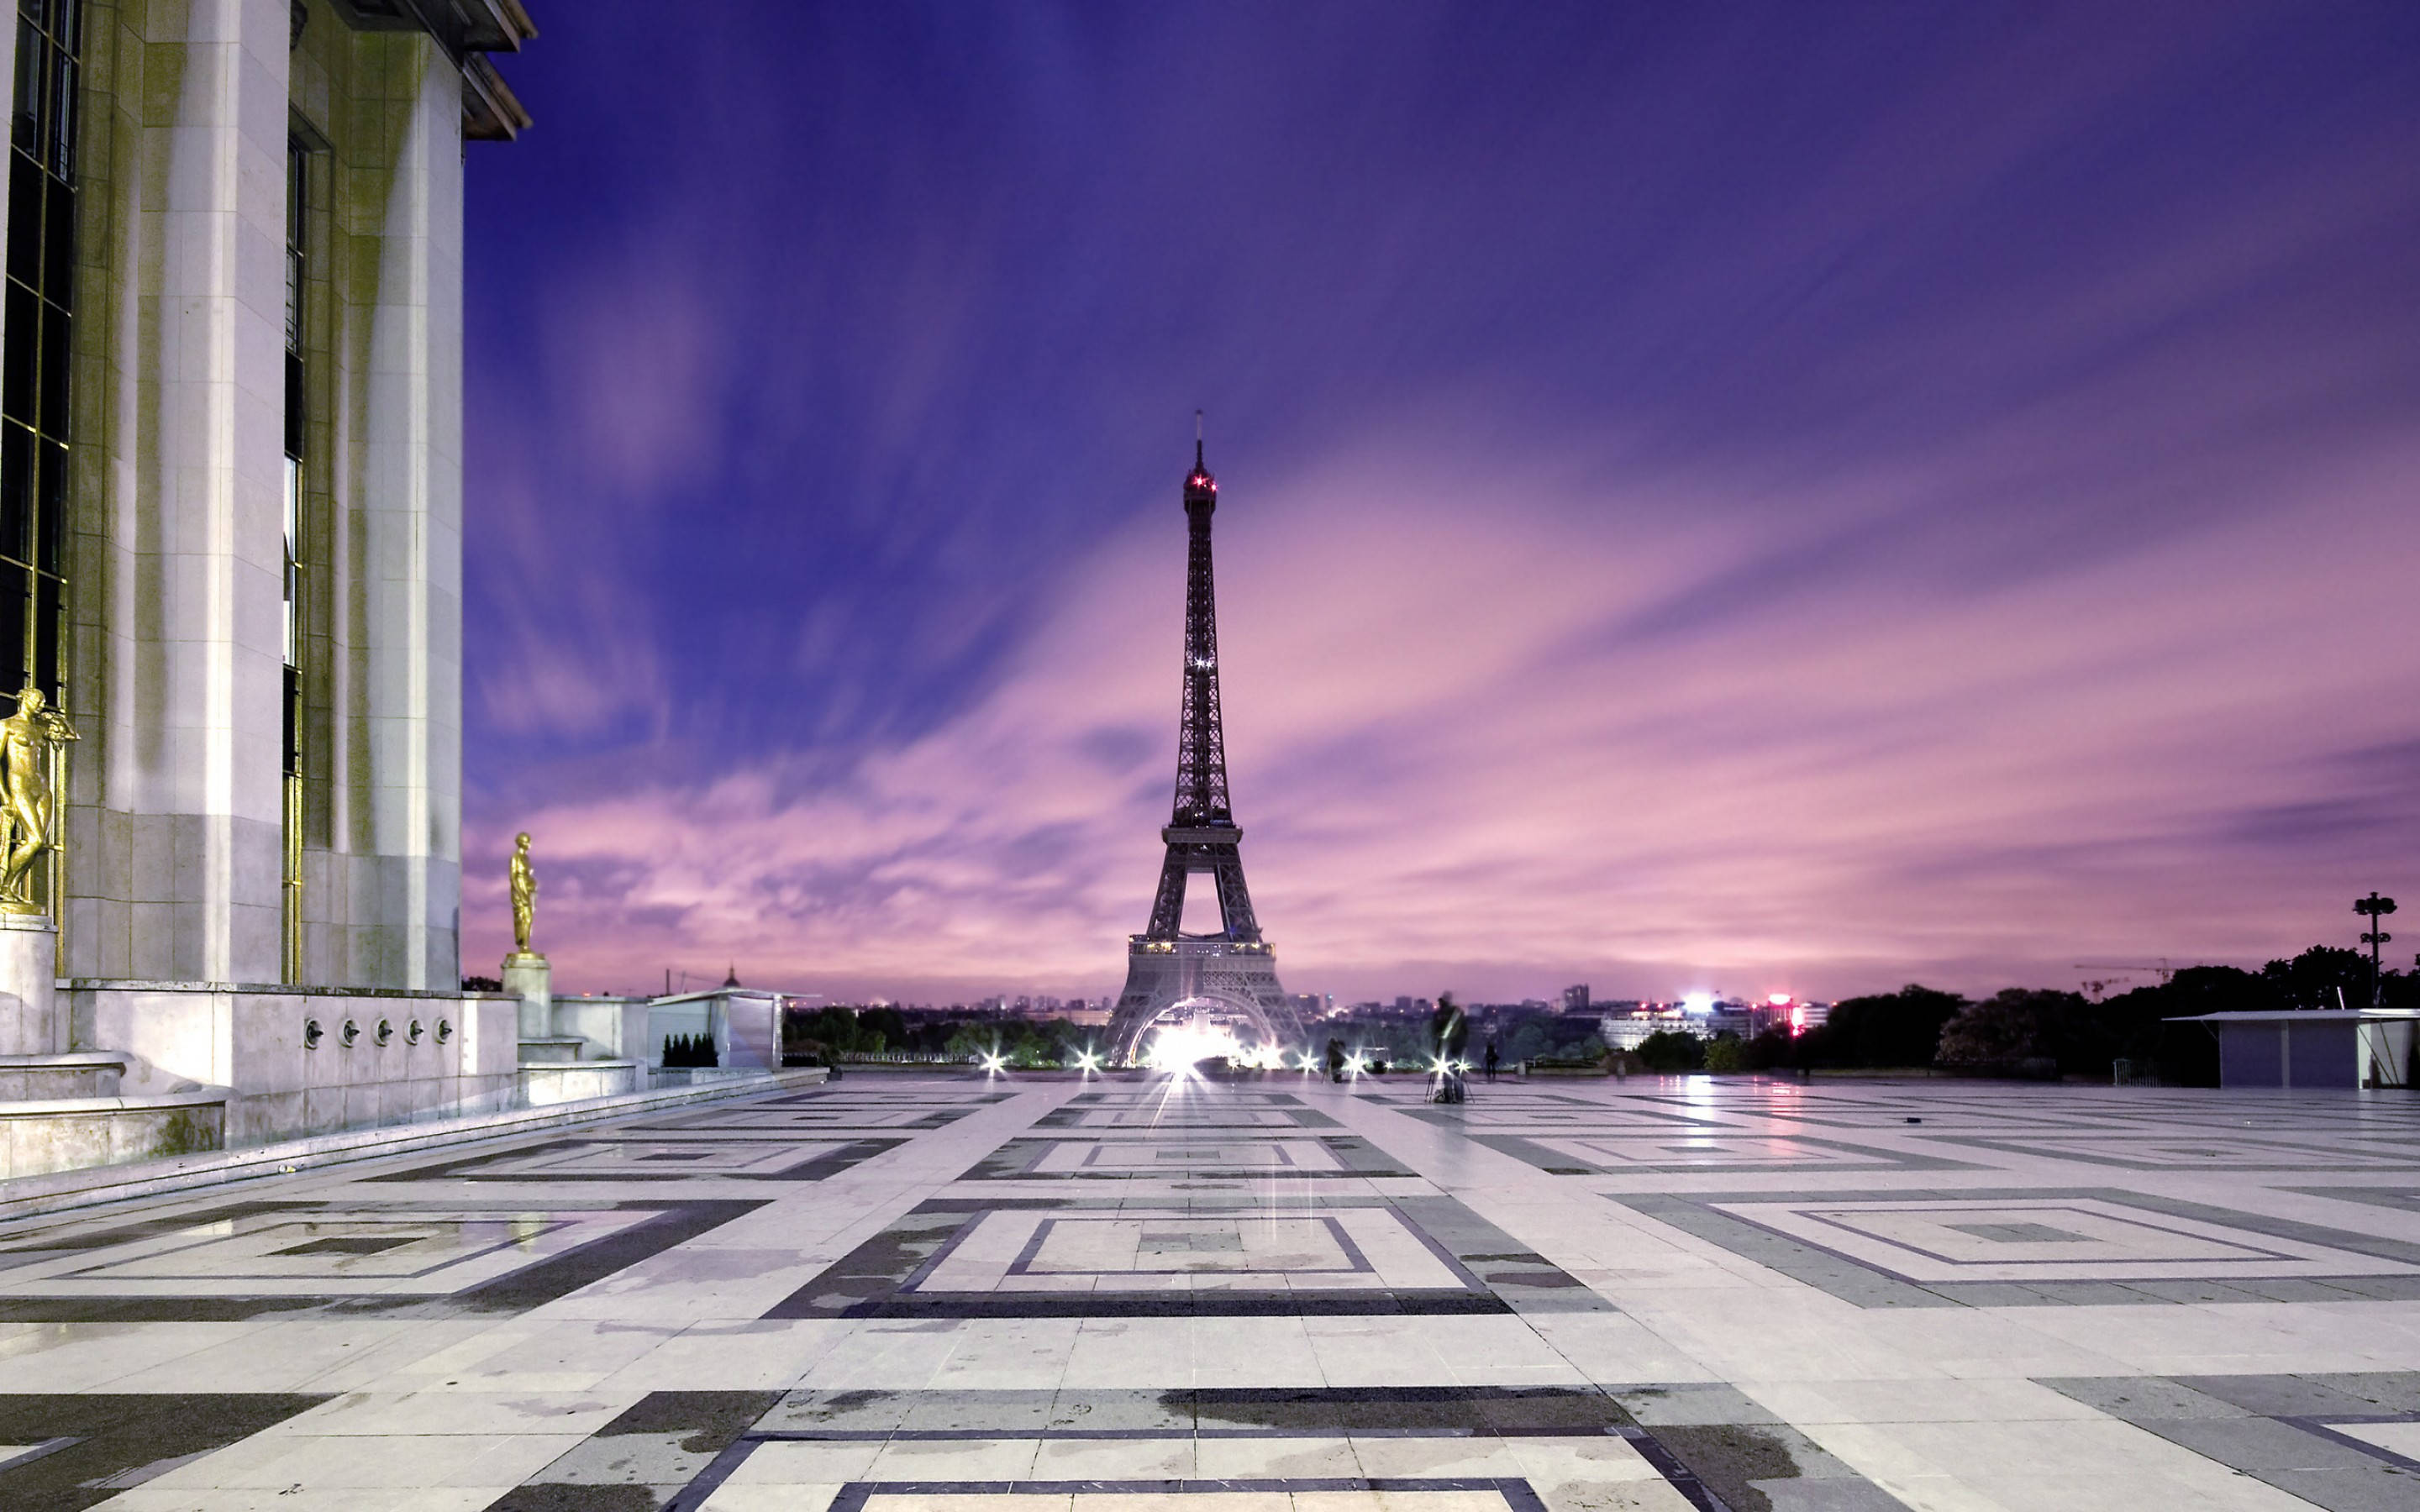 A view of the Eiffel Tower from the Trocadero in Paris, France. - Paris